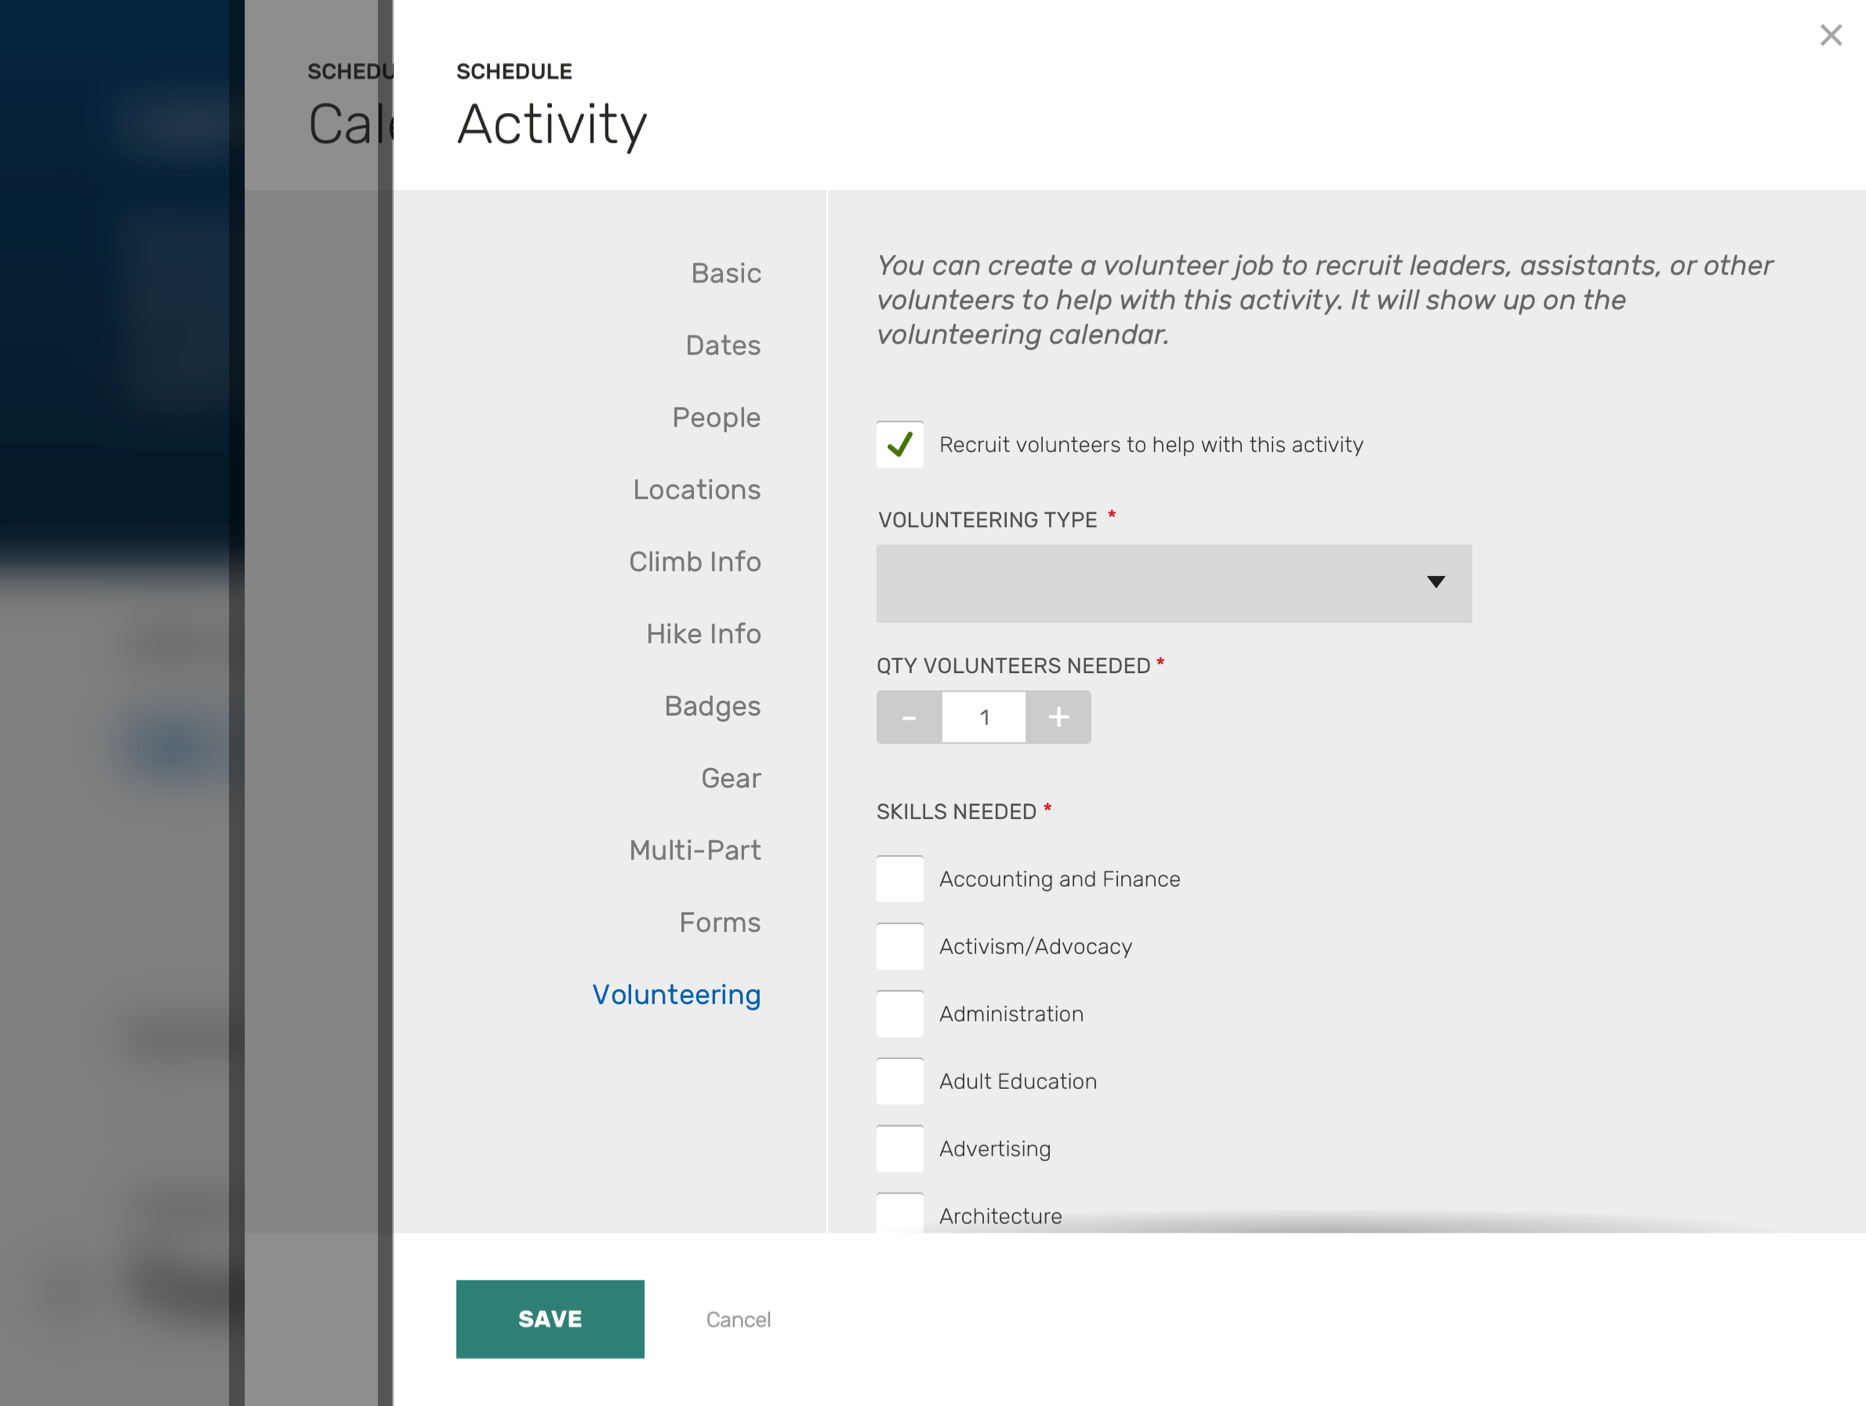 Screenshot: UI panel for scheduling an activity, with options for volunteer recruitment